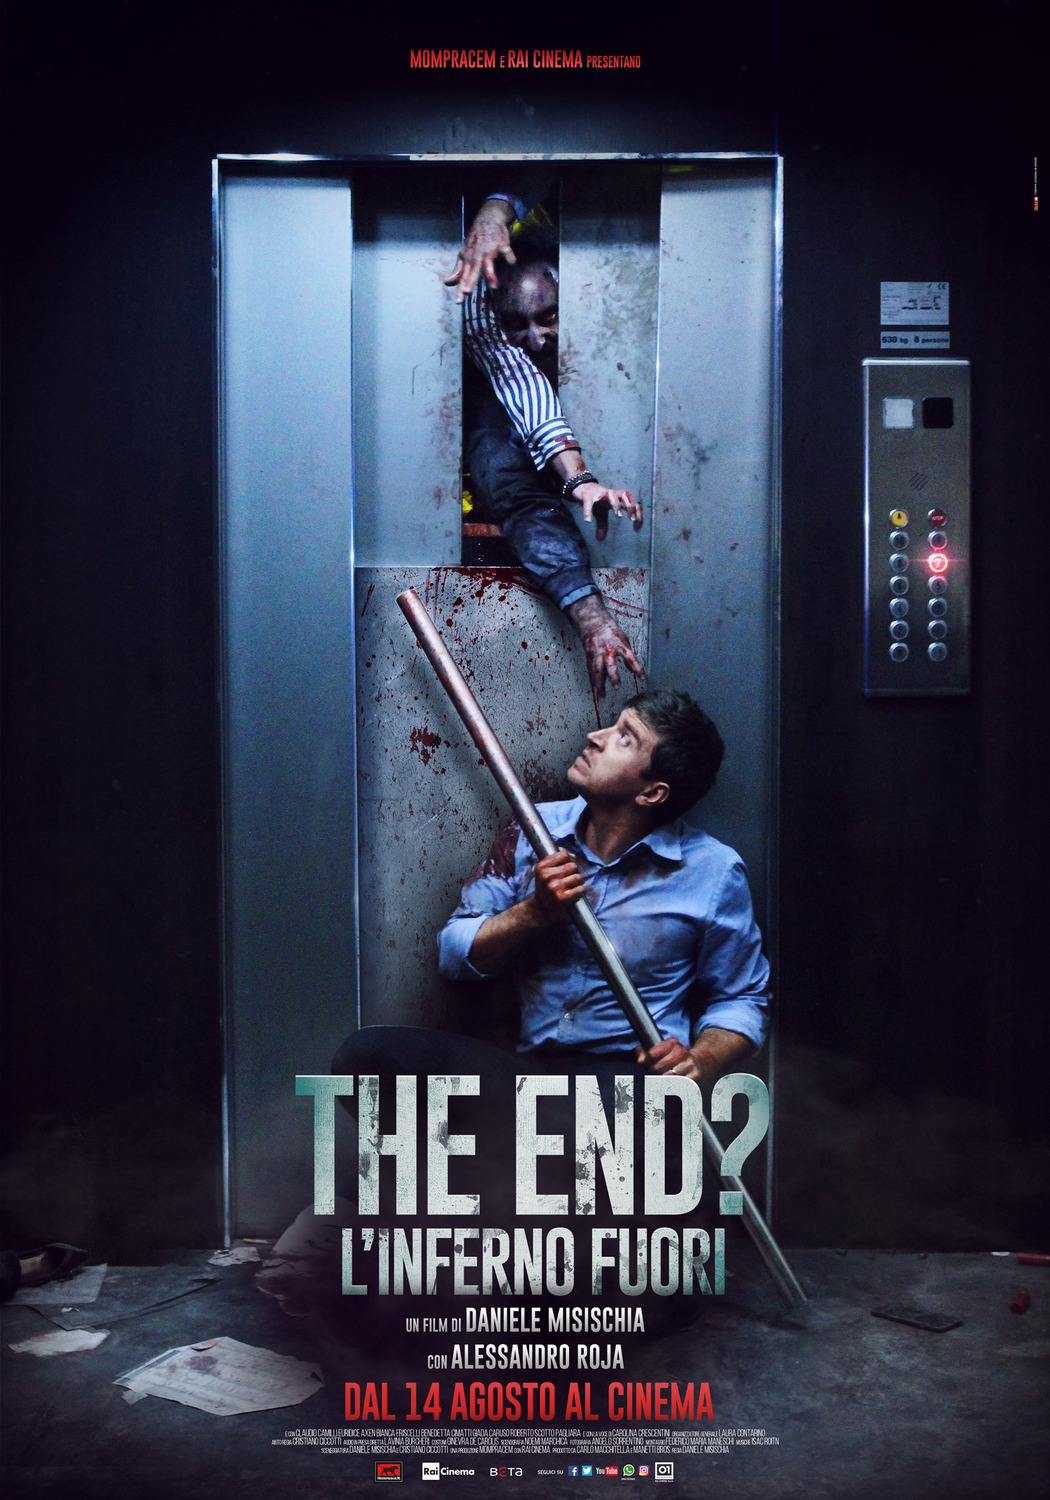 Extra Large Movie Poster Image for The End? L'inferno fuori 